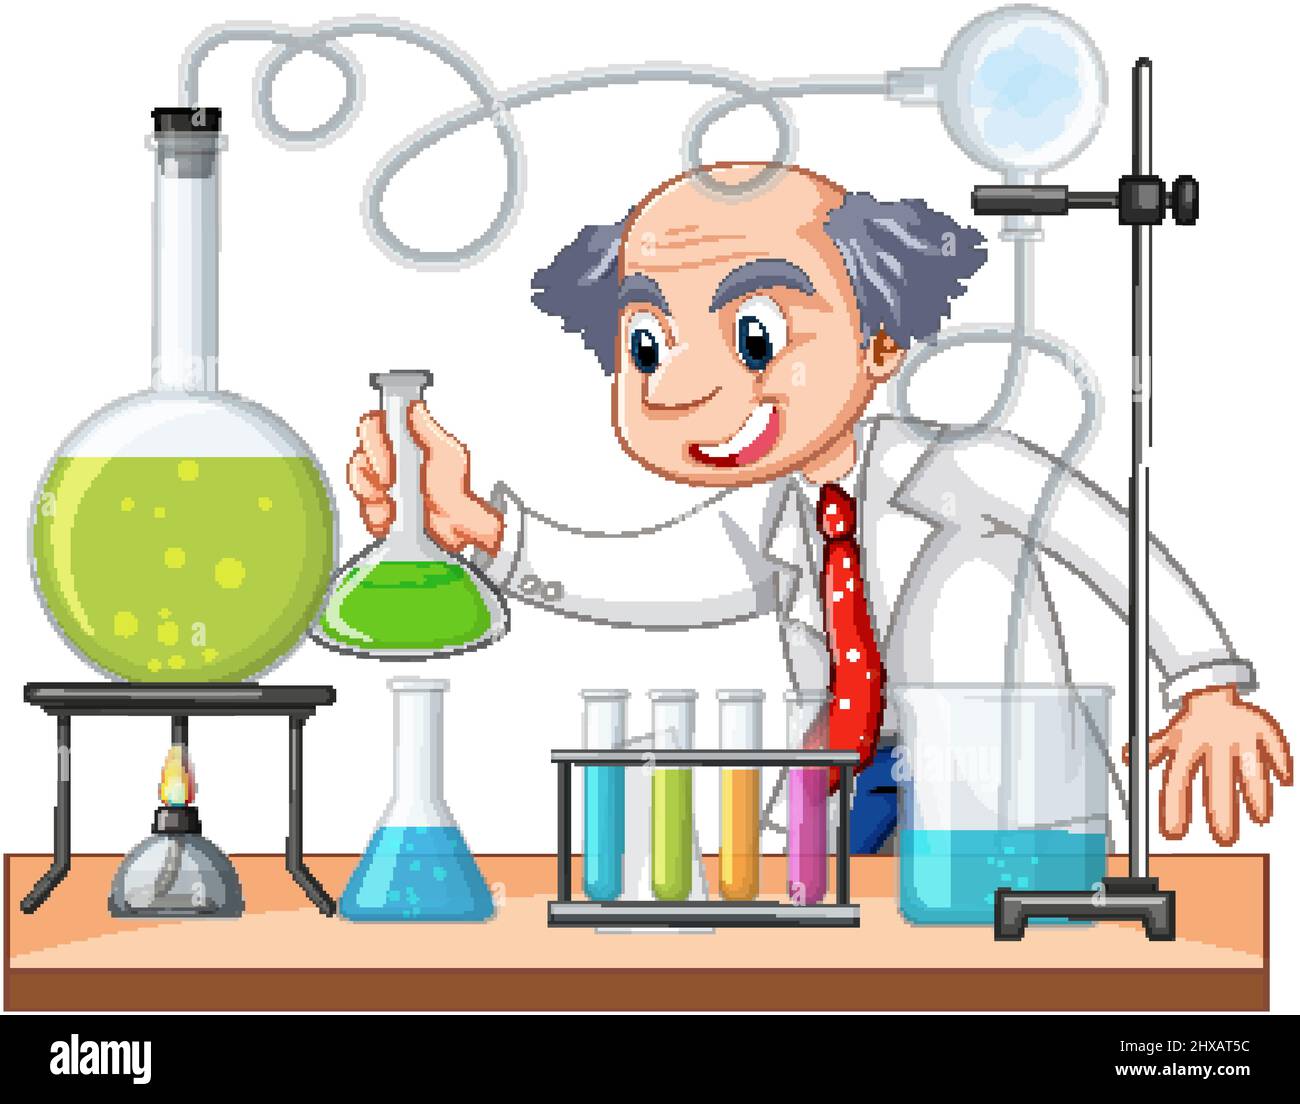 A chemist experiment at lab illustration Stock Vector